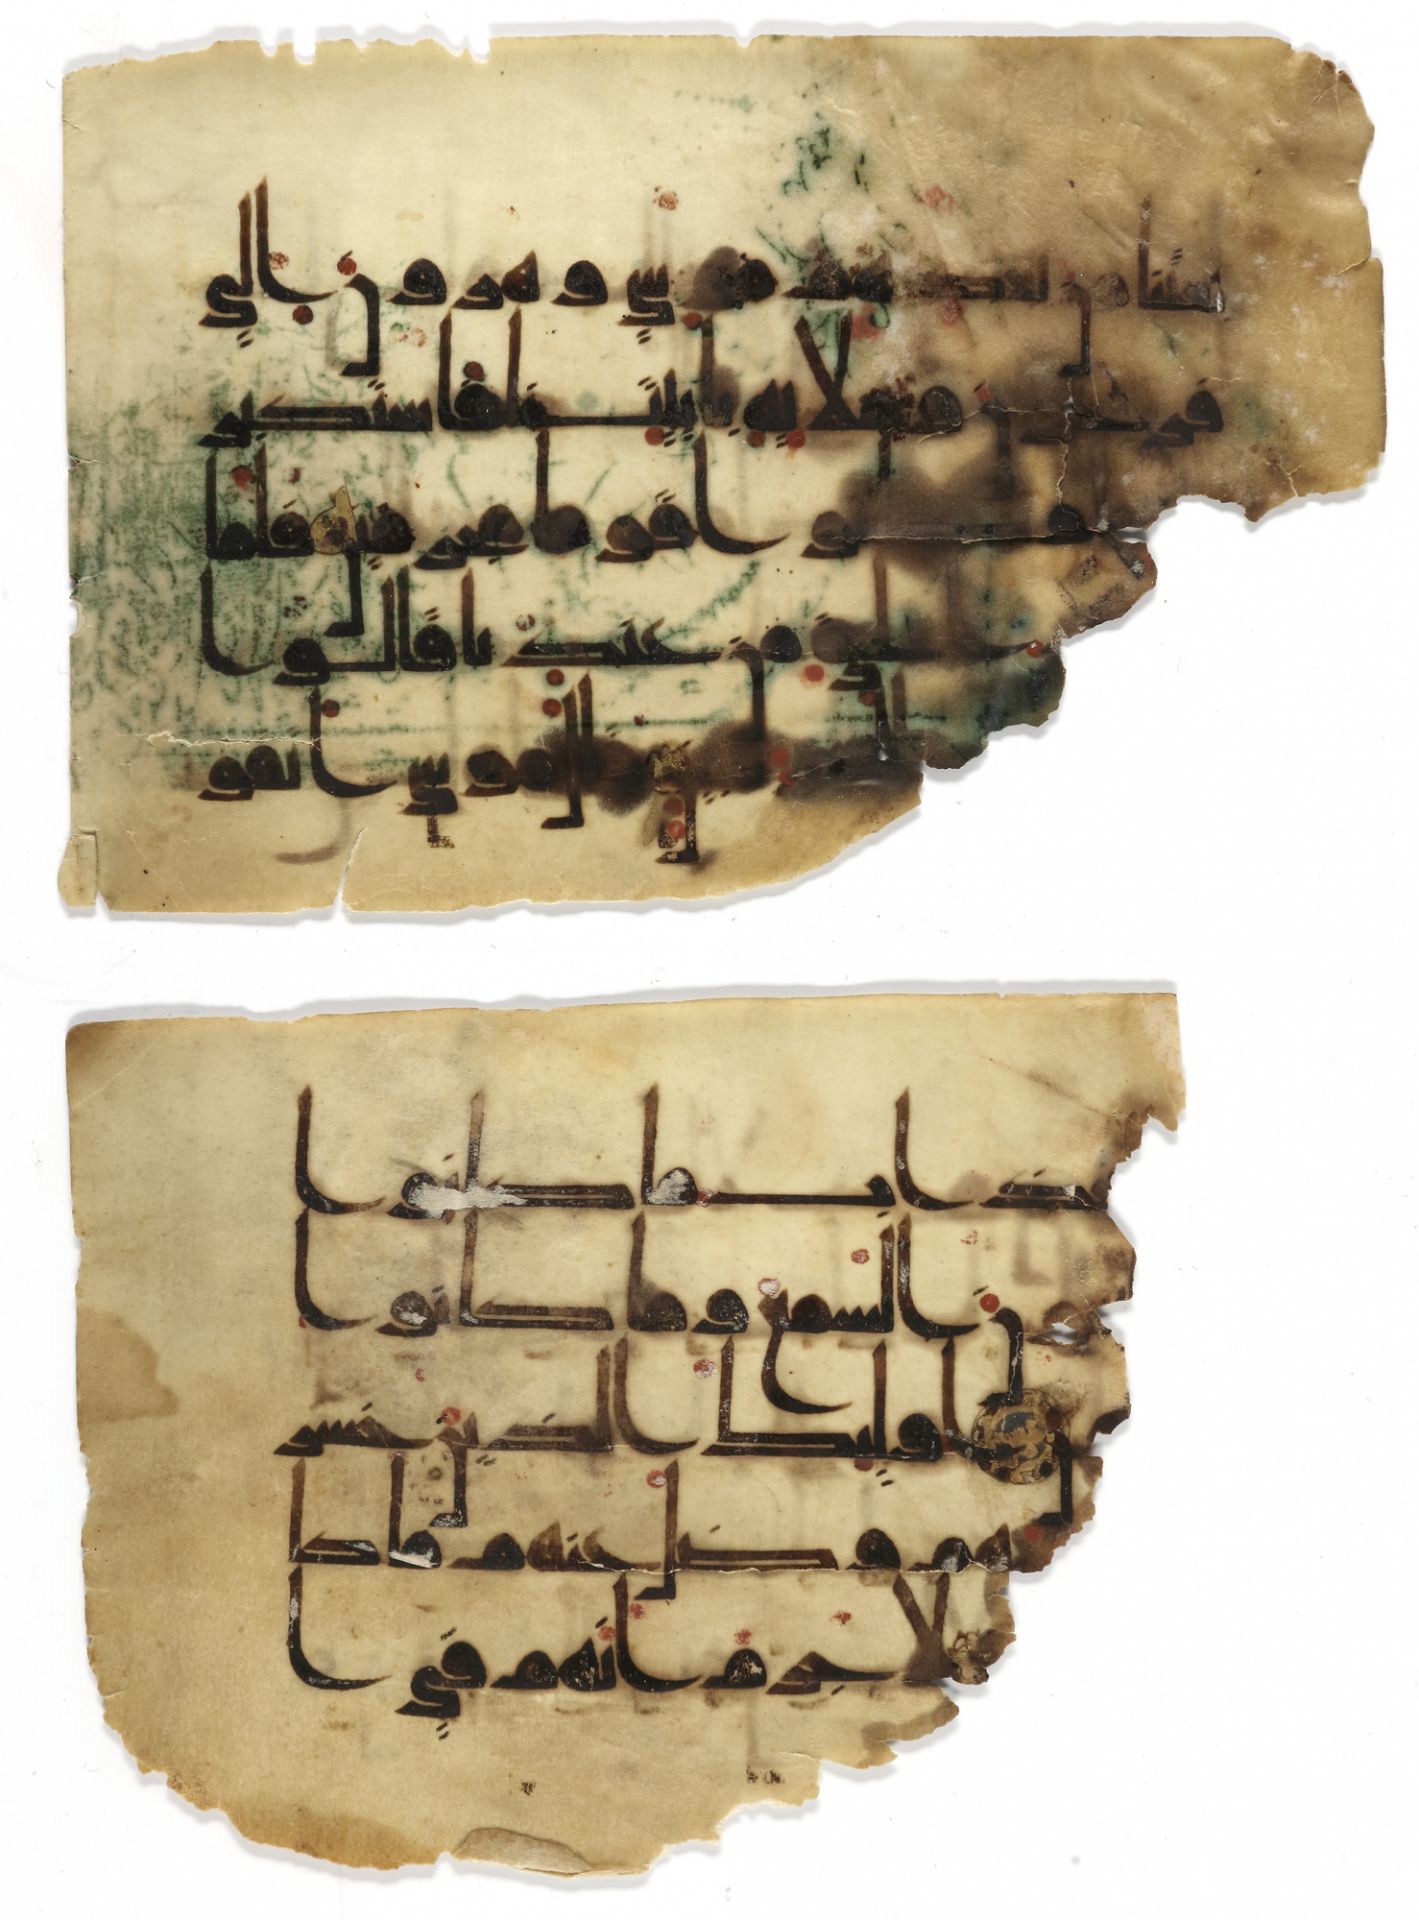 TWO FOLIOS FROM DIFFERENT KUFIC QURANS ON VELLUM, NORTH AFRICA OR NEAR EAST, 9TH-10TH CENTURY - Image 2 of 2